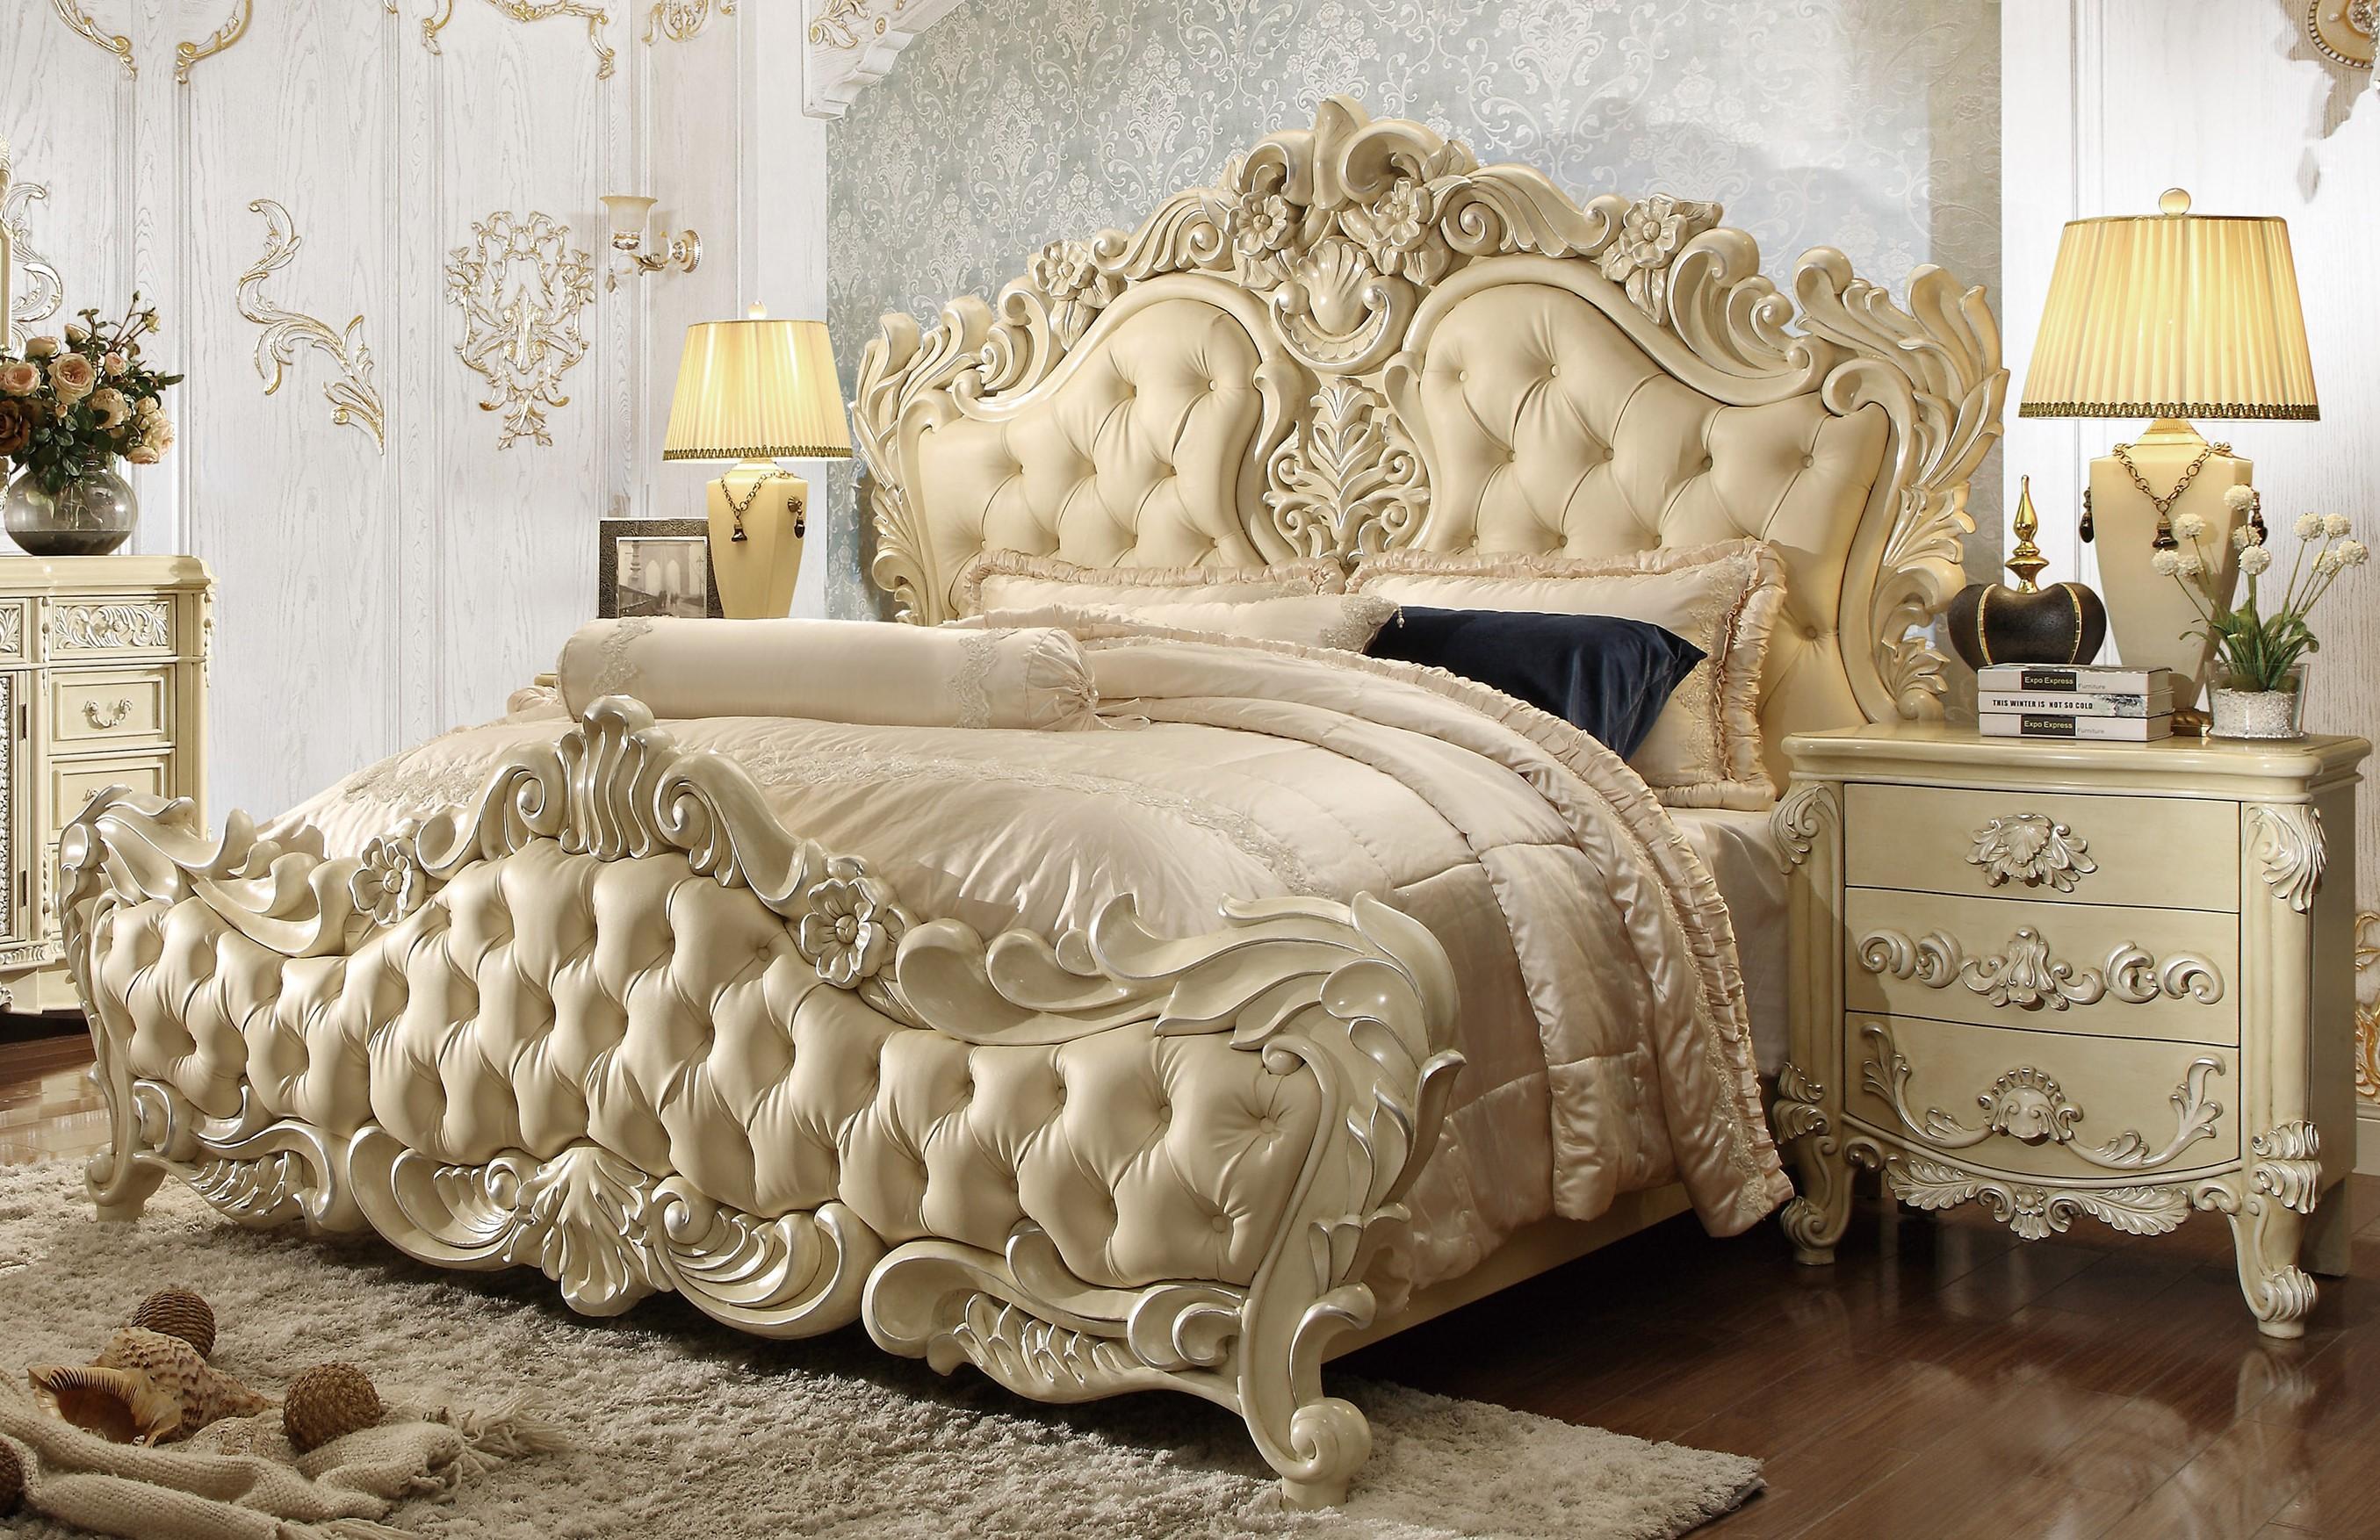 Traditional Panel Bedroom Set HD-5800 HD-5800-CK-3PC in Pearl, Cream Leather